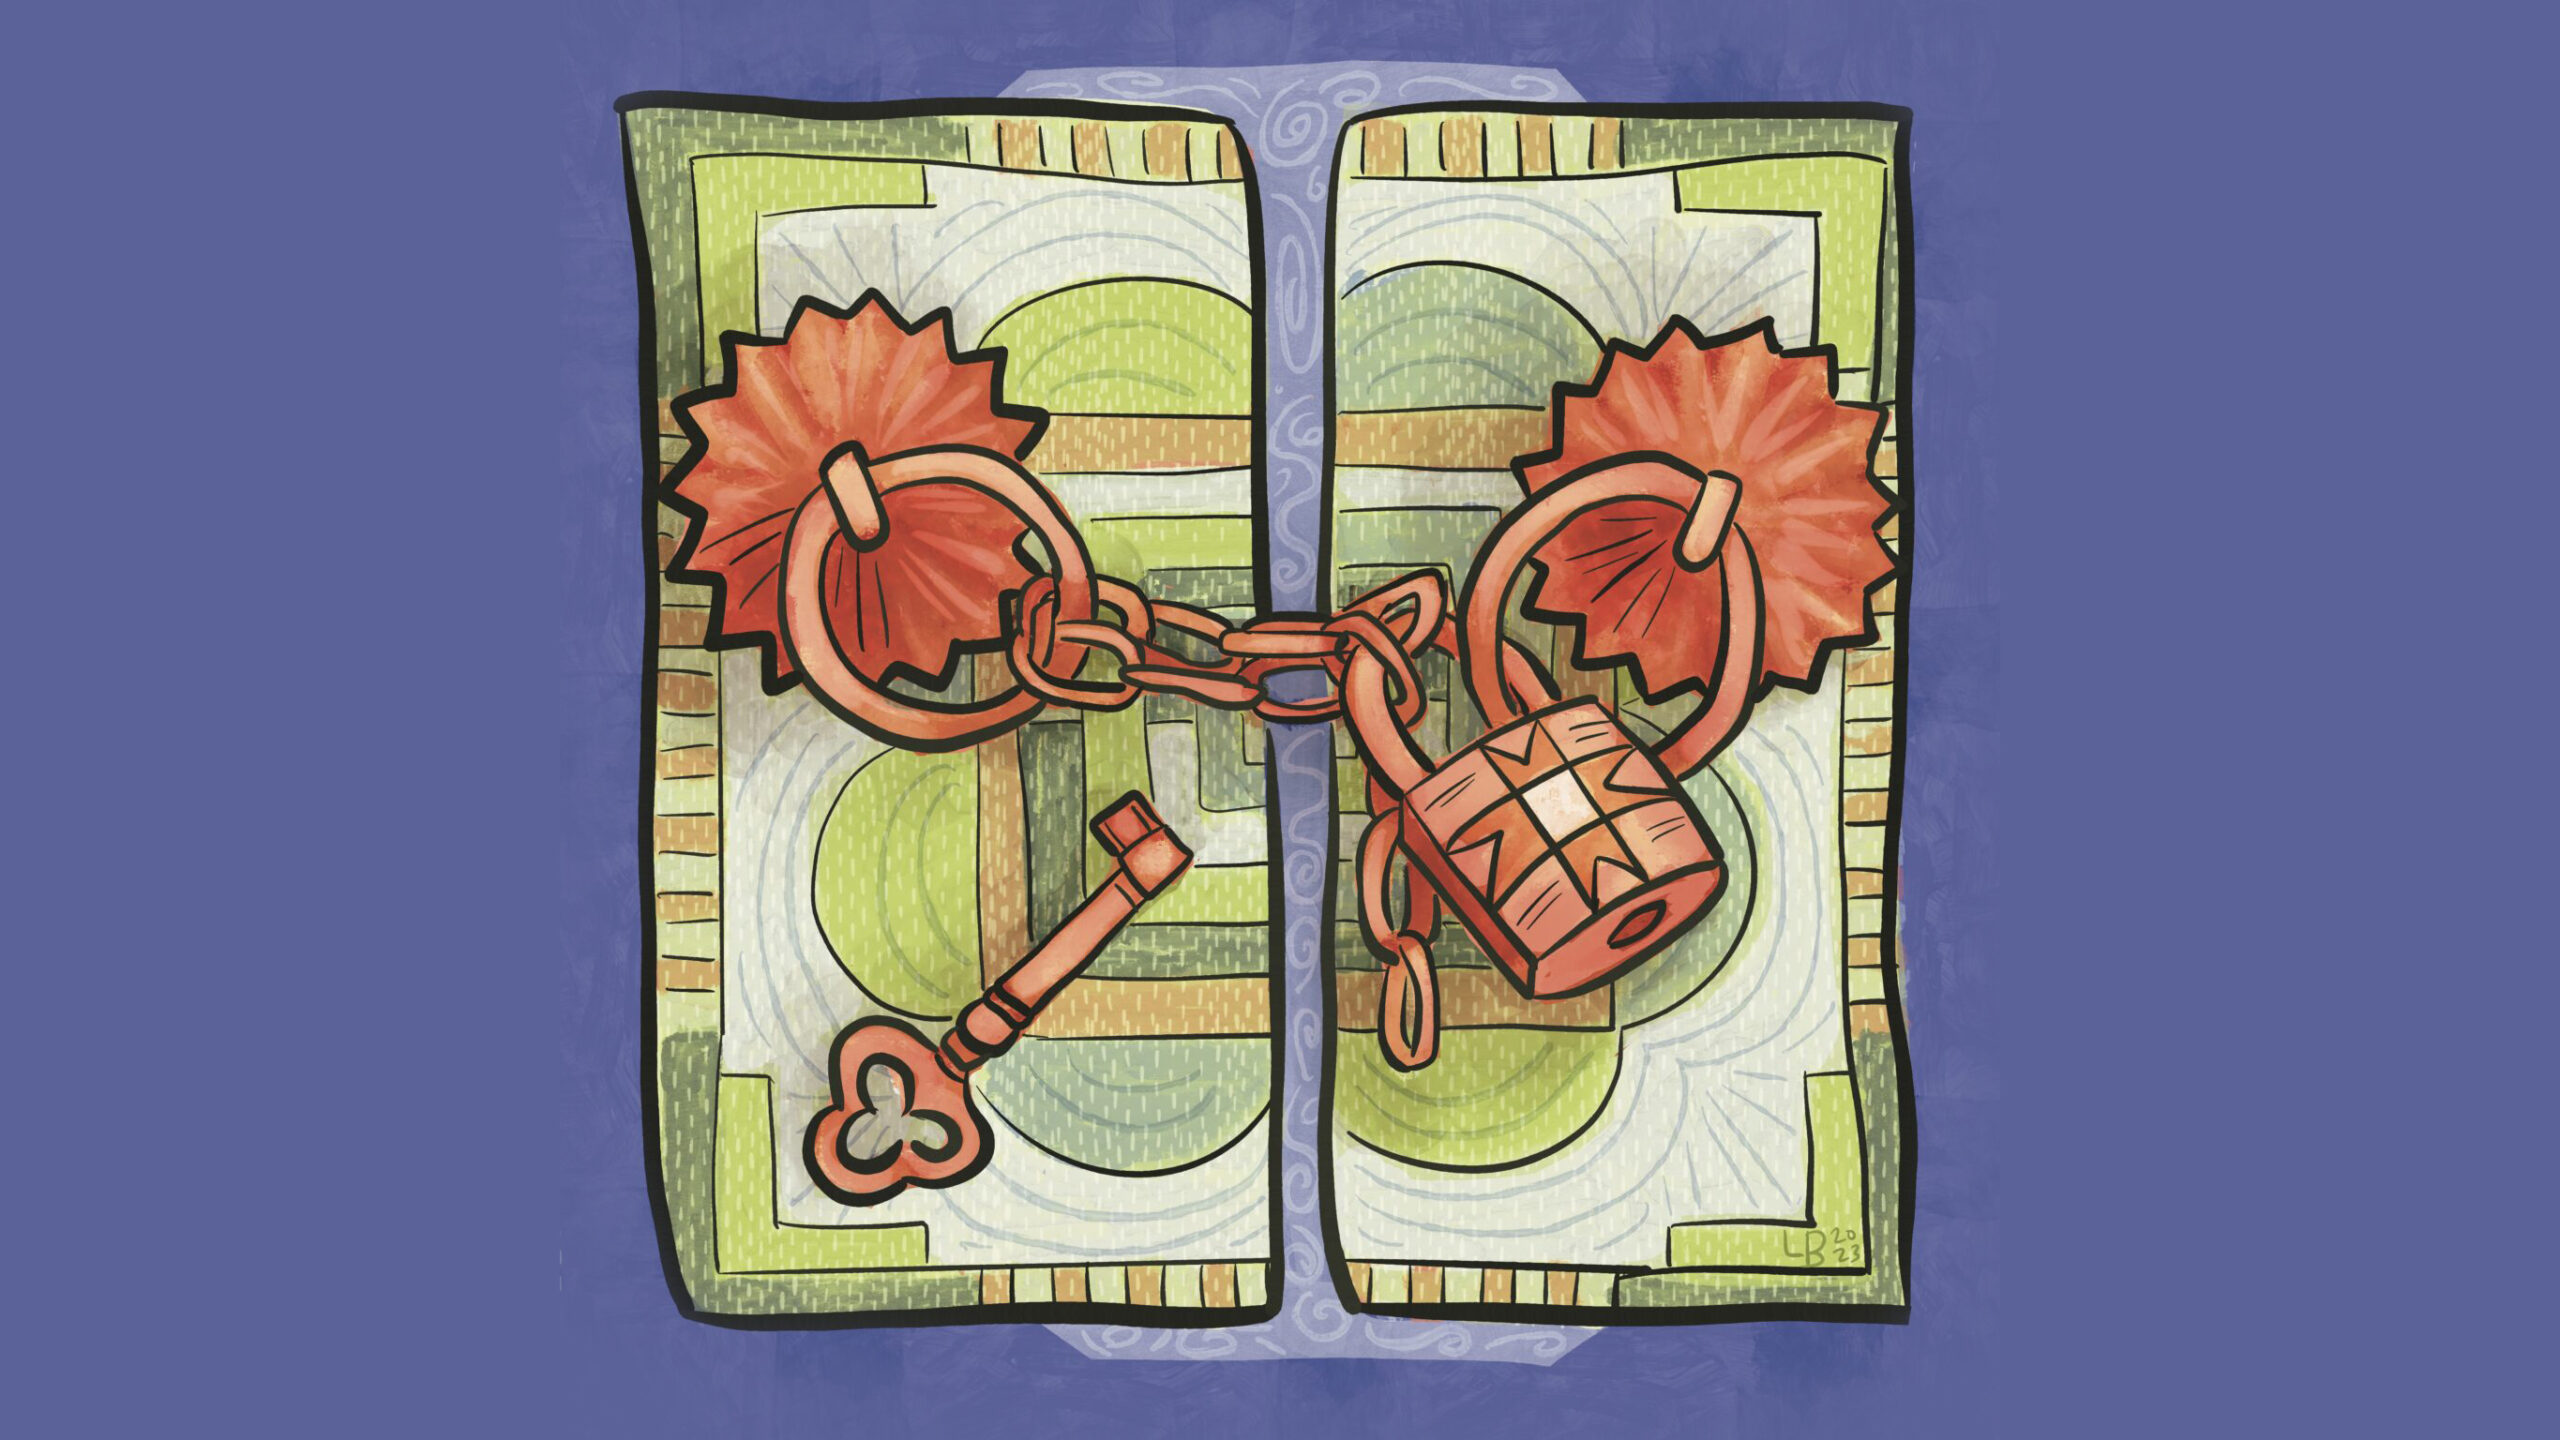 An illustration of a quilt with a lock across it